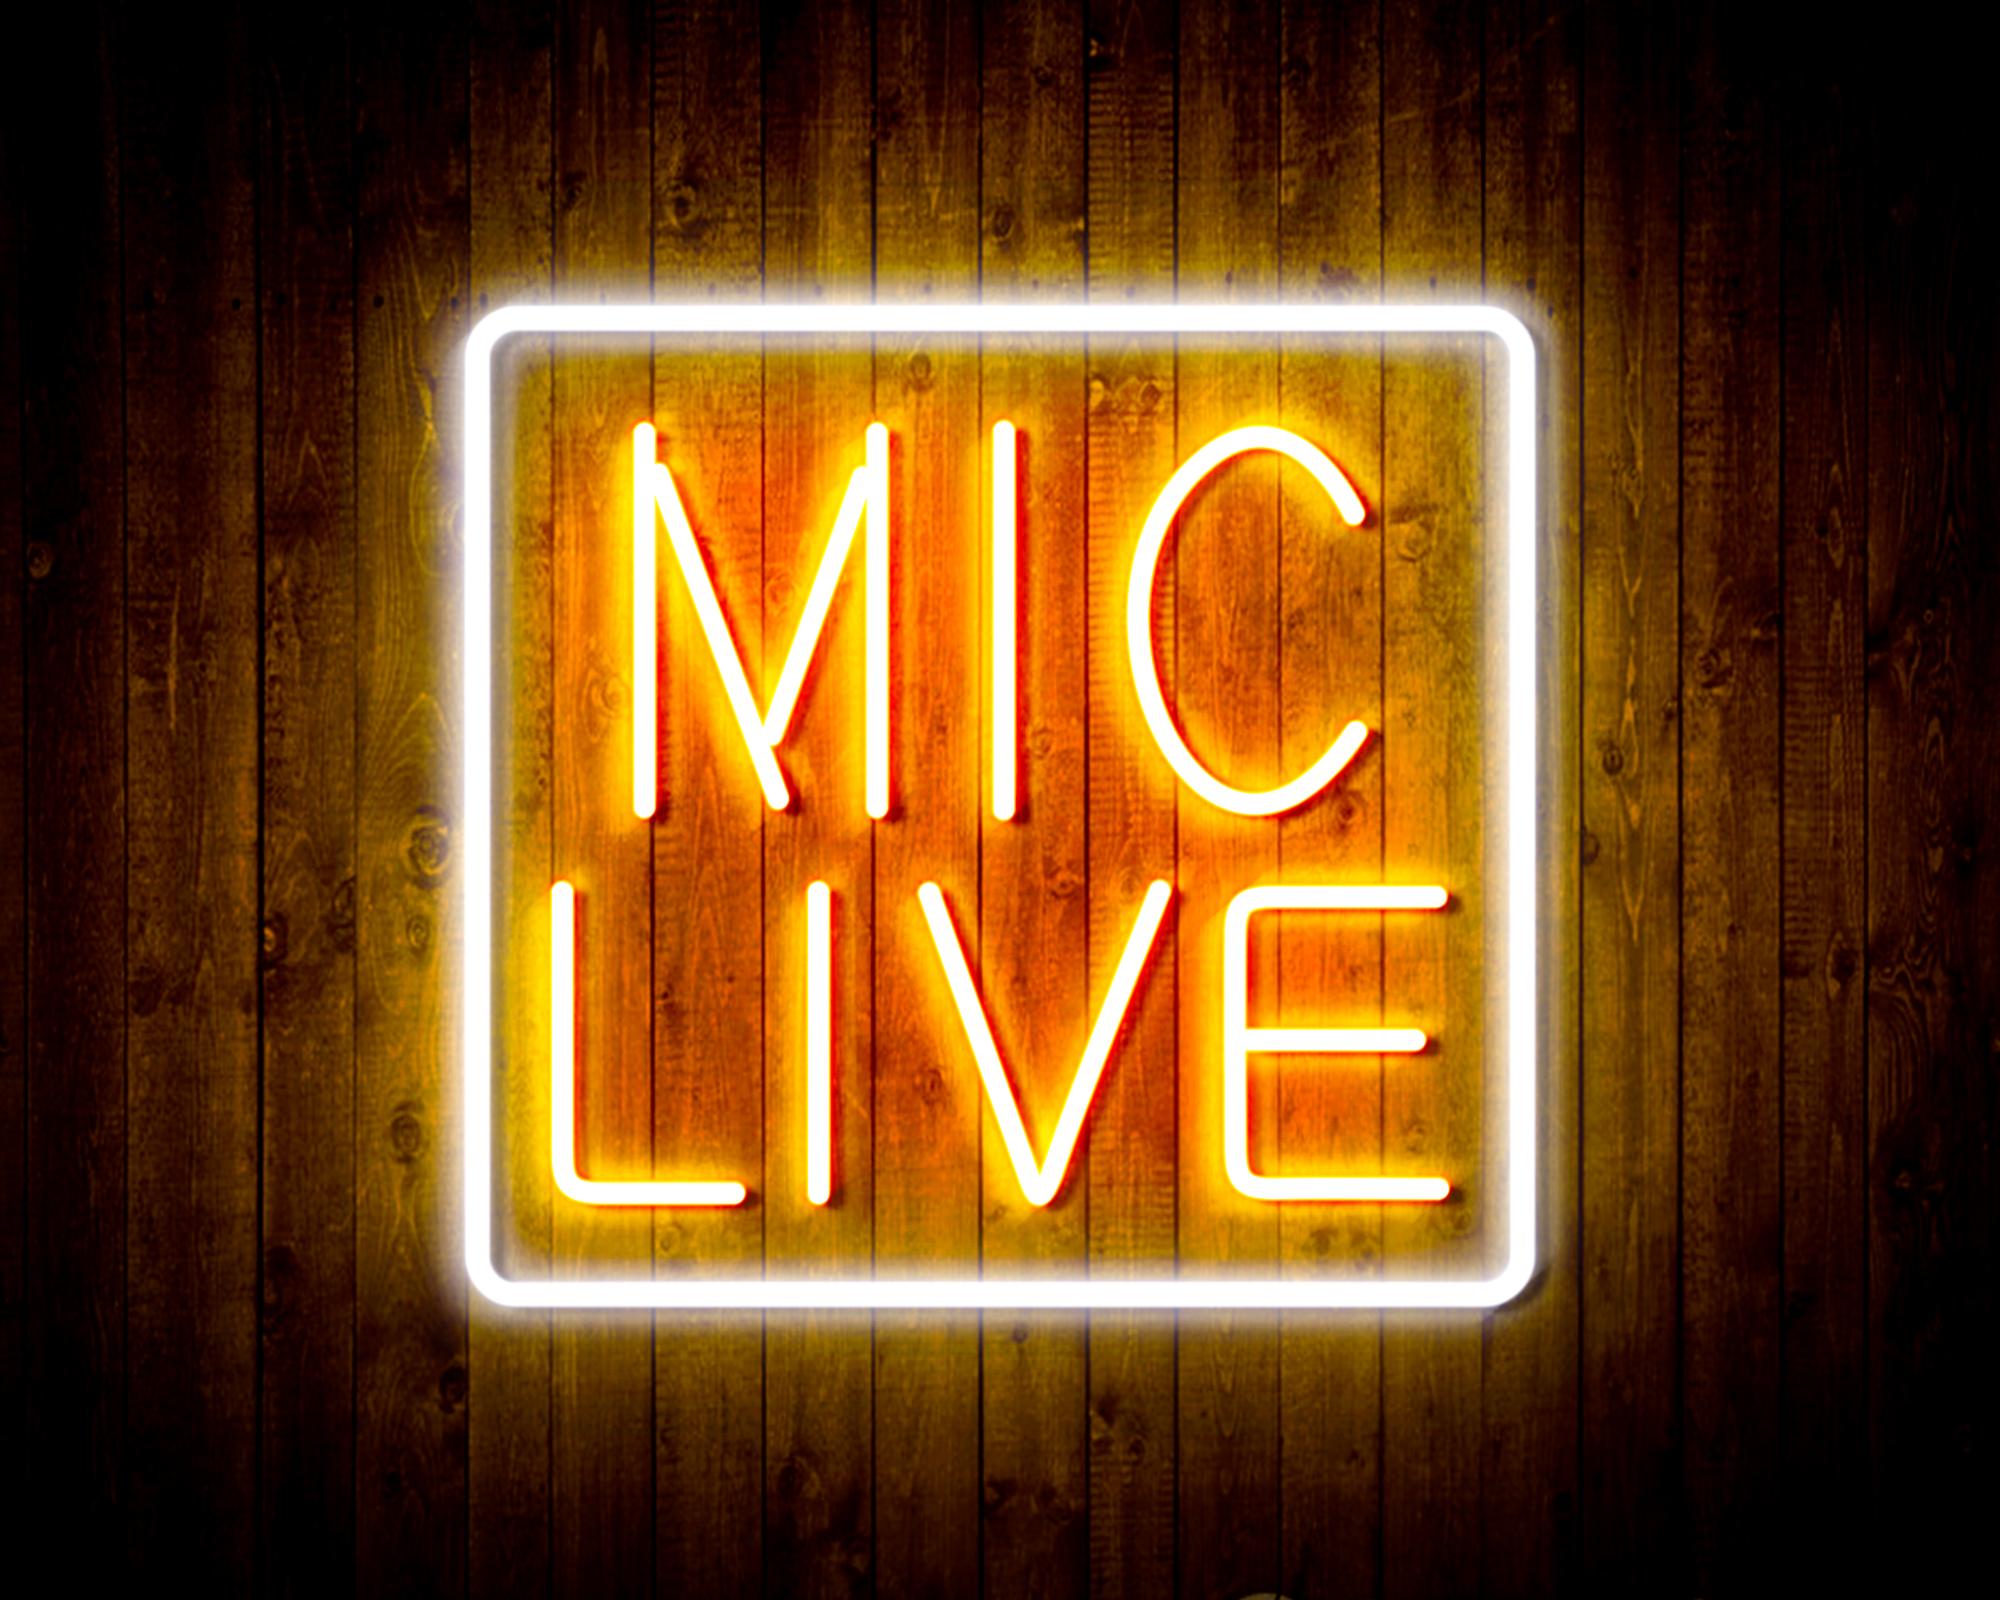 Mic Live LED Neon Sign Wall Light